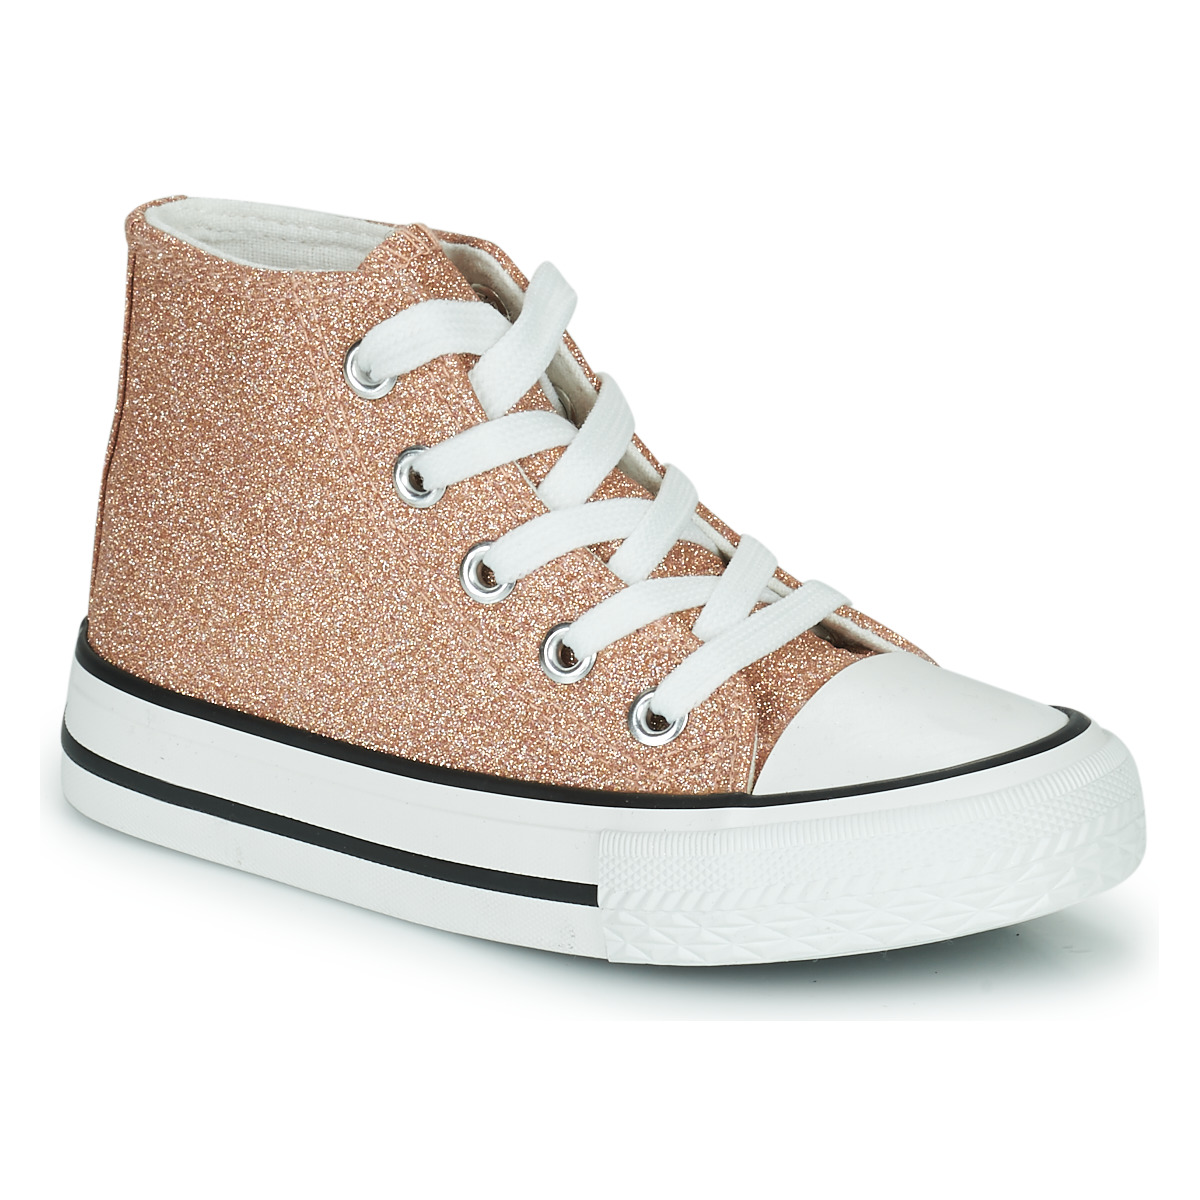 Shoes Girl High top trainers Citrouille et Compagnie OUTIL PAILLETTES Champagne